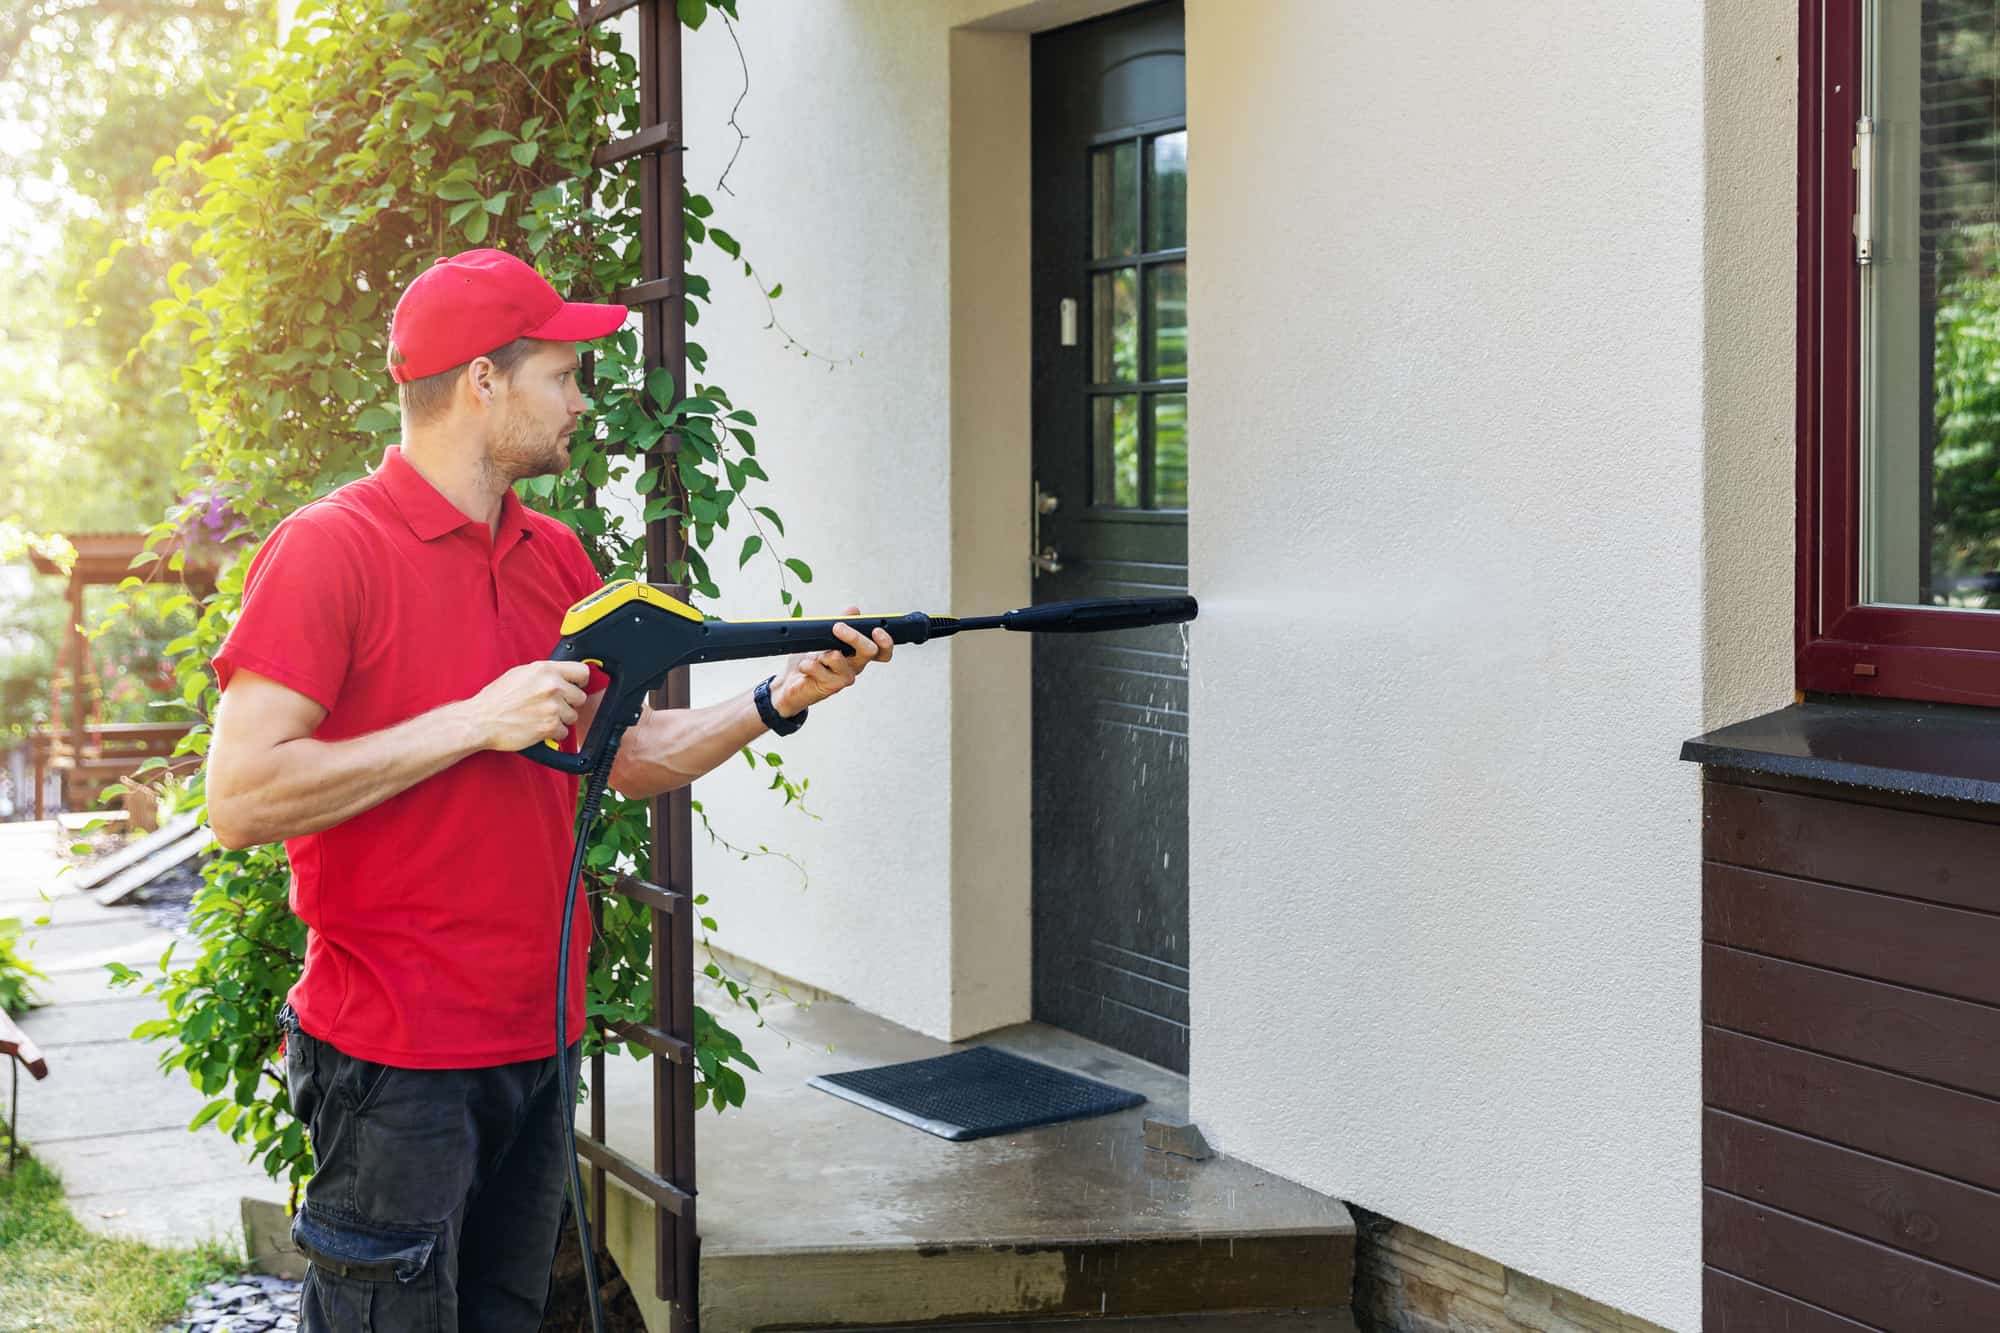 worker with high pressure washer cleaning house facade